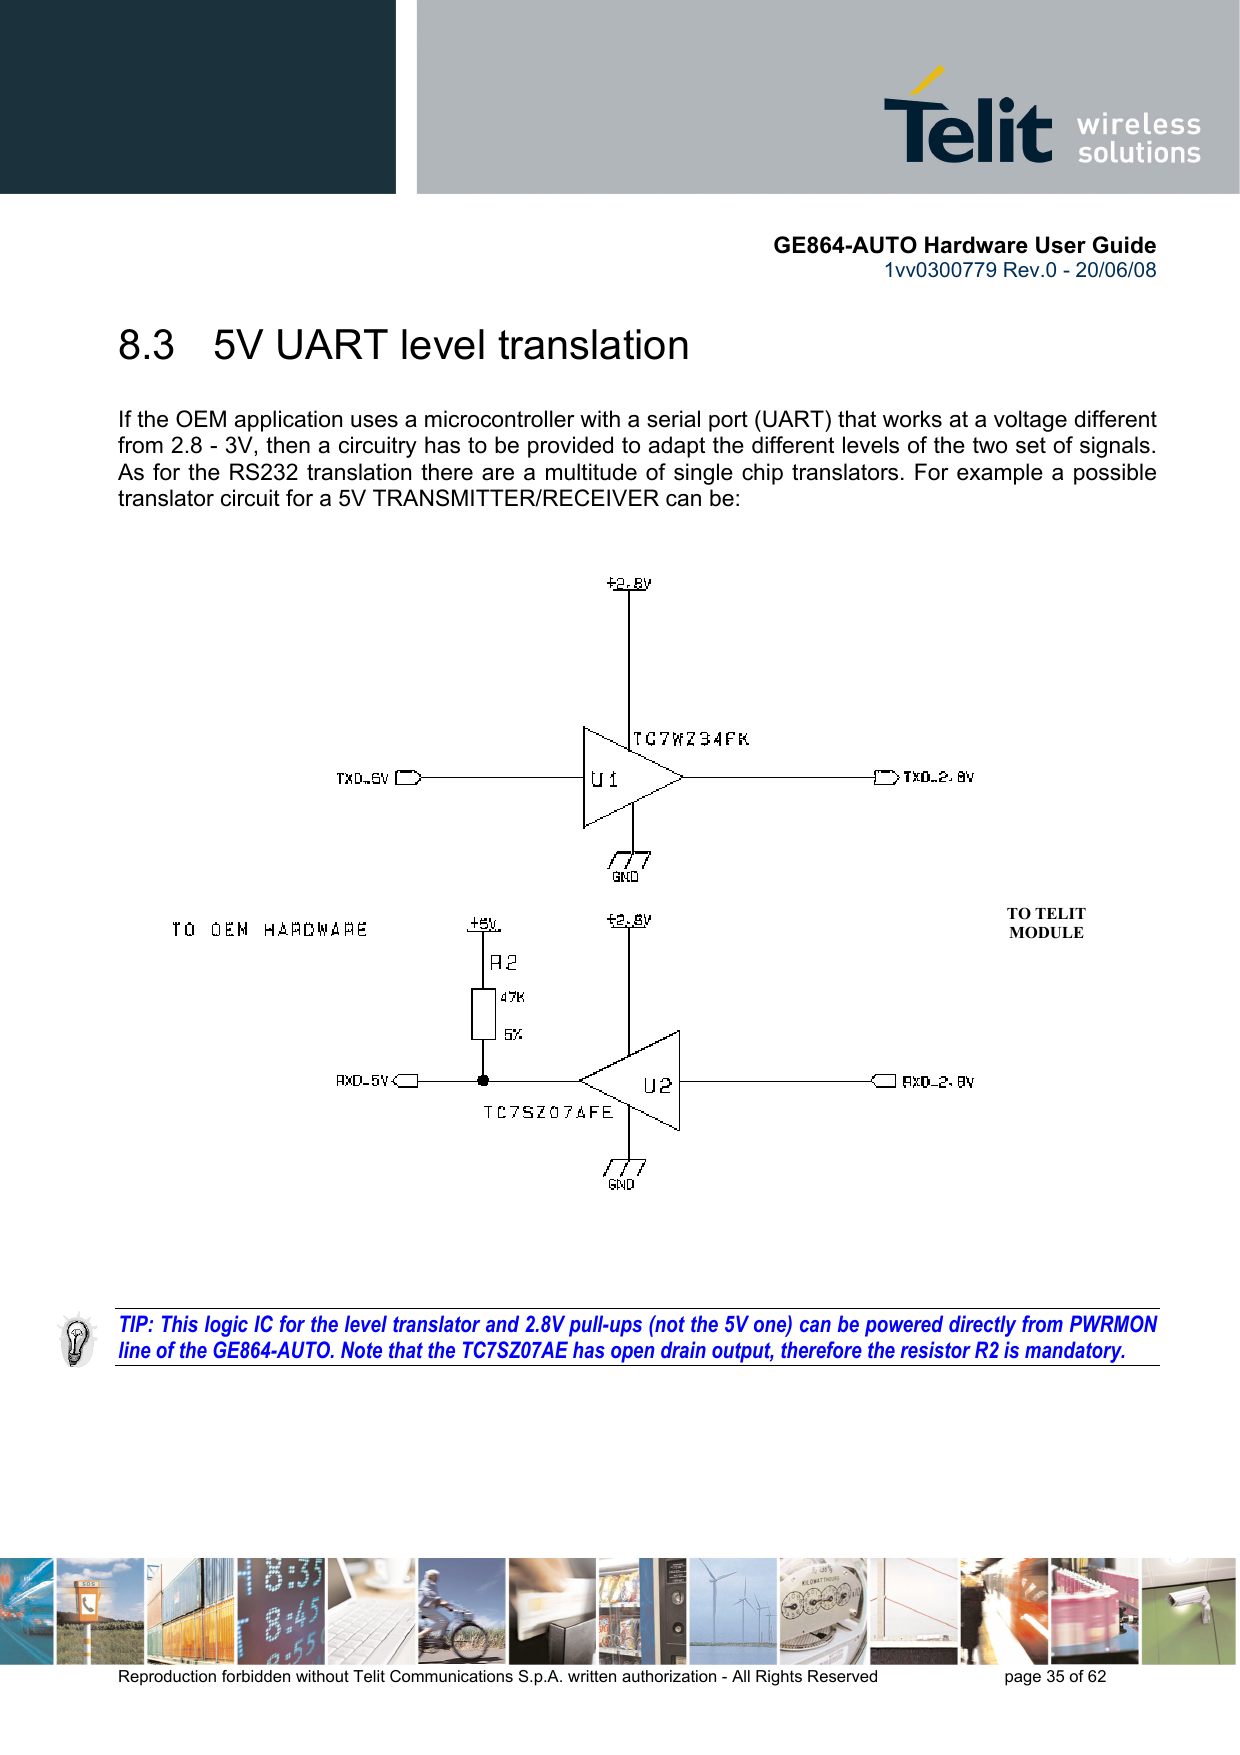       GE864-AUTO Hardware User Guide 1vv0300779 Rev.0 - 20/06/08      Reproduction forbidden without Telit Communications S.p.A. written authorization - All Rights Reserved    page 35 of 62   8.3   5V UART level translation If the OEM application uses a microcontroller with a serial port (UART) that works at a voltage different from 2.8 - 3V, then a circuitry has to be provided to adapt the different levels of the two set of signals. As for the RS232 translation there are a multitude of single chip translators. For example a possible translator circuit for a 5V TRANSMITTER/RECEIVER can be:      TIP: This logic IC for the level translator and 2.8V pull-ups (not the 5V one) can be powered directly from PWRMON line of the GE864-AUTO. Note that the TC7SZ07AE has open drain output, therefore the resistor R2 is mandatory.  TO TELIT MODULE 